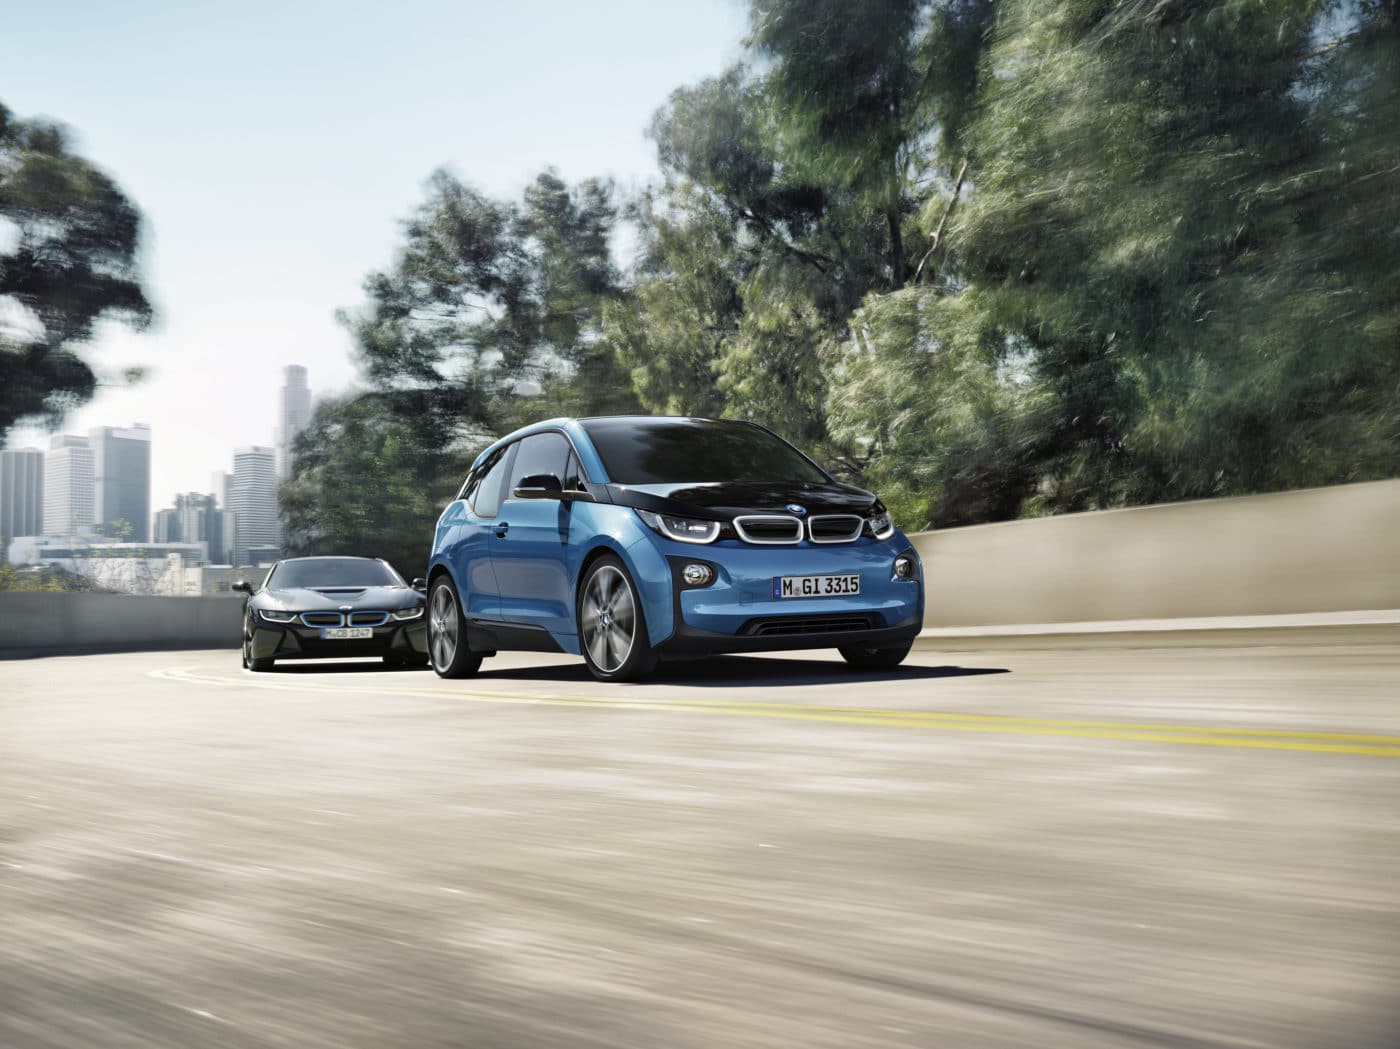 The BMW i3 REx driving report